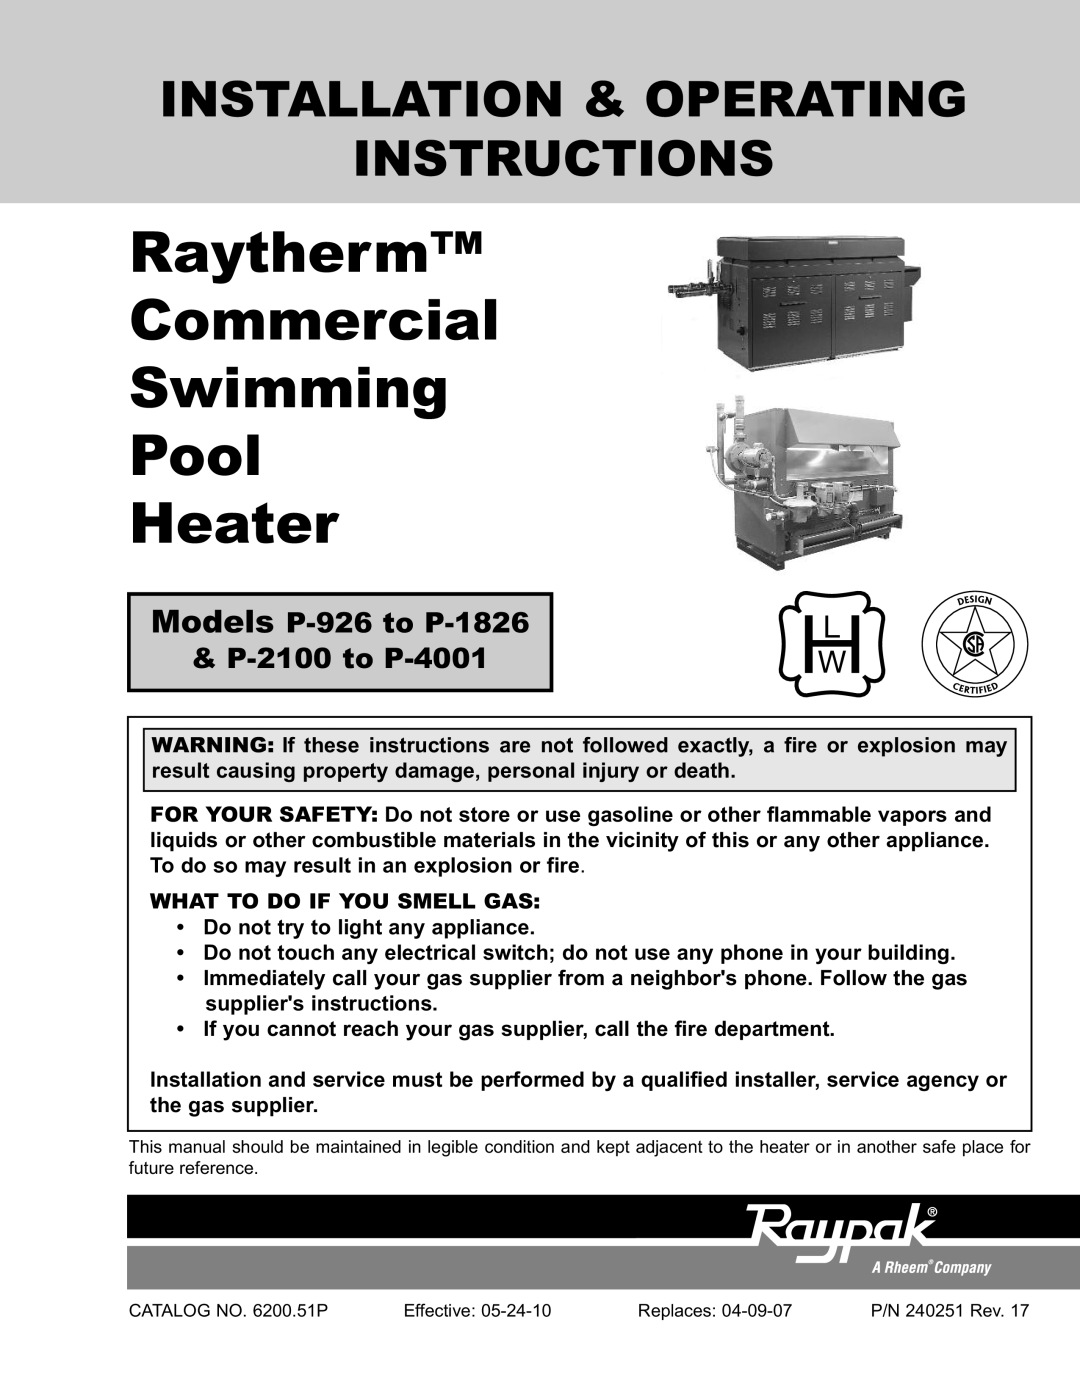 Raypak P-4001, P-1826, P-926, P-2100 manual Raytherm Commercial Swimming Pool Heater, Installation & Operating Instructions 